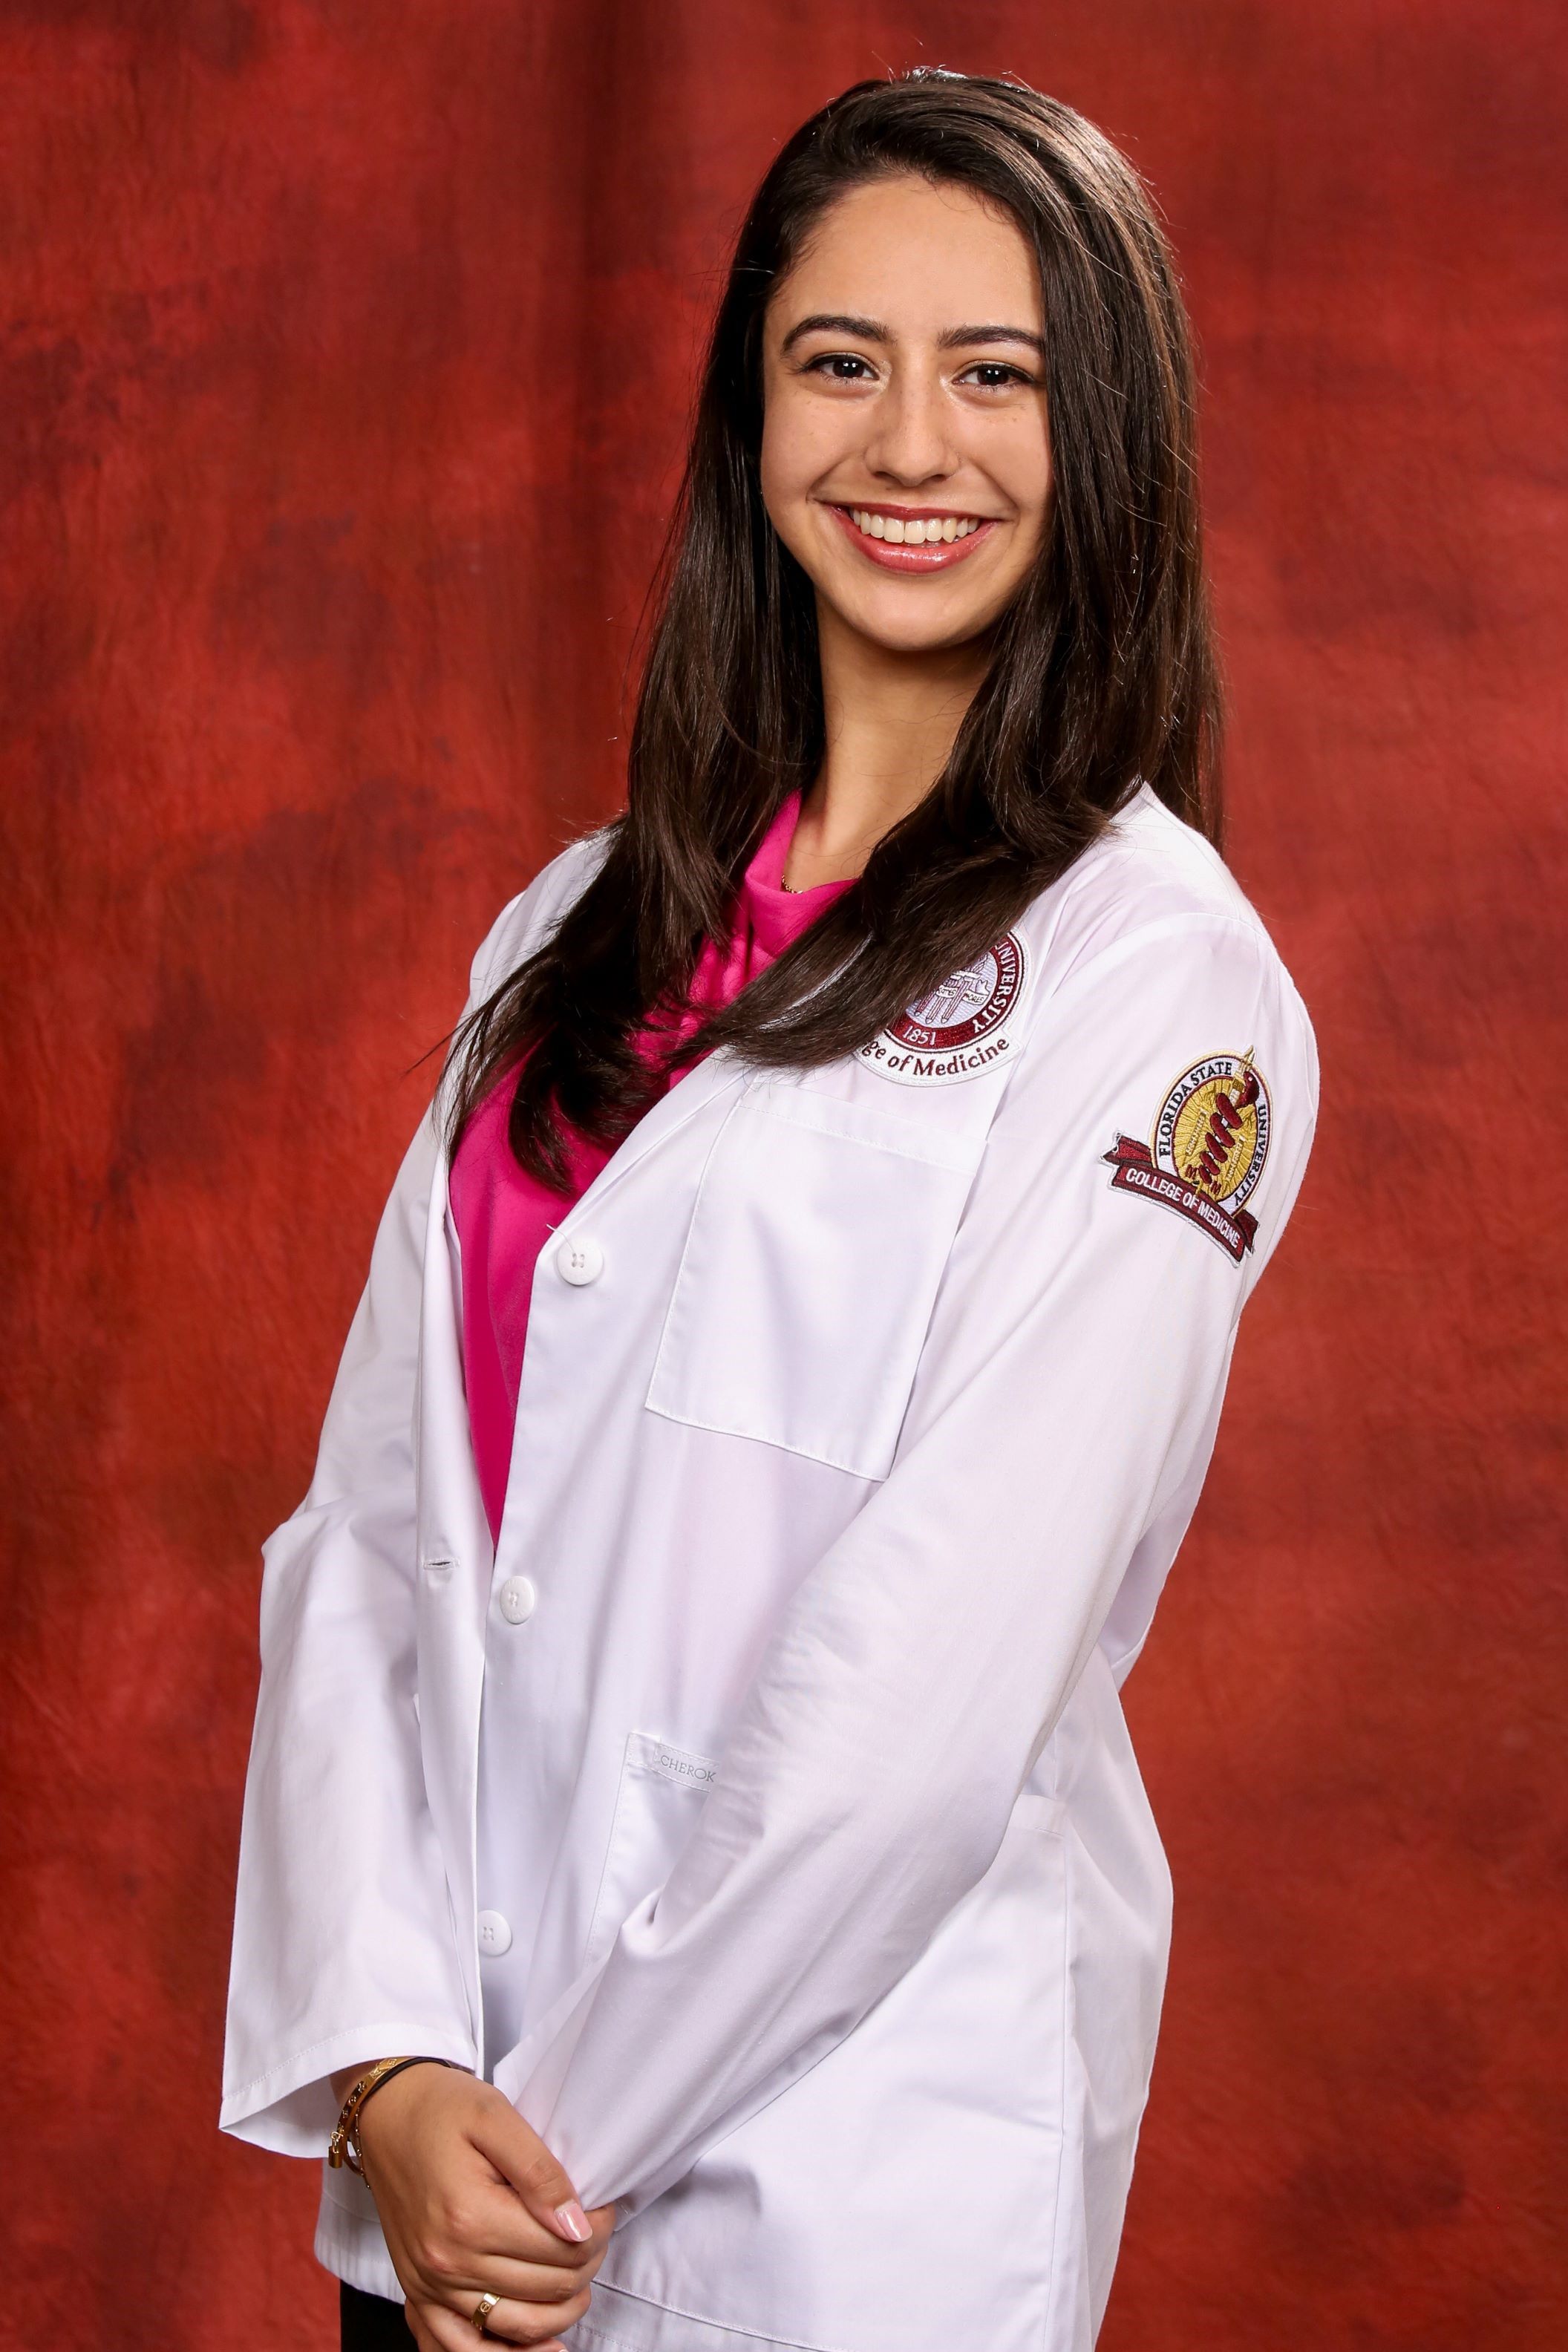 Jane Hufnagel White Coat Picture